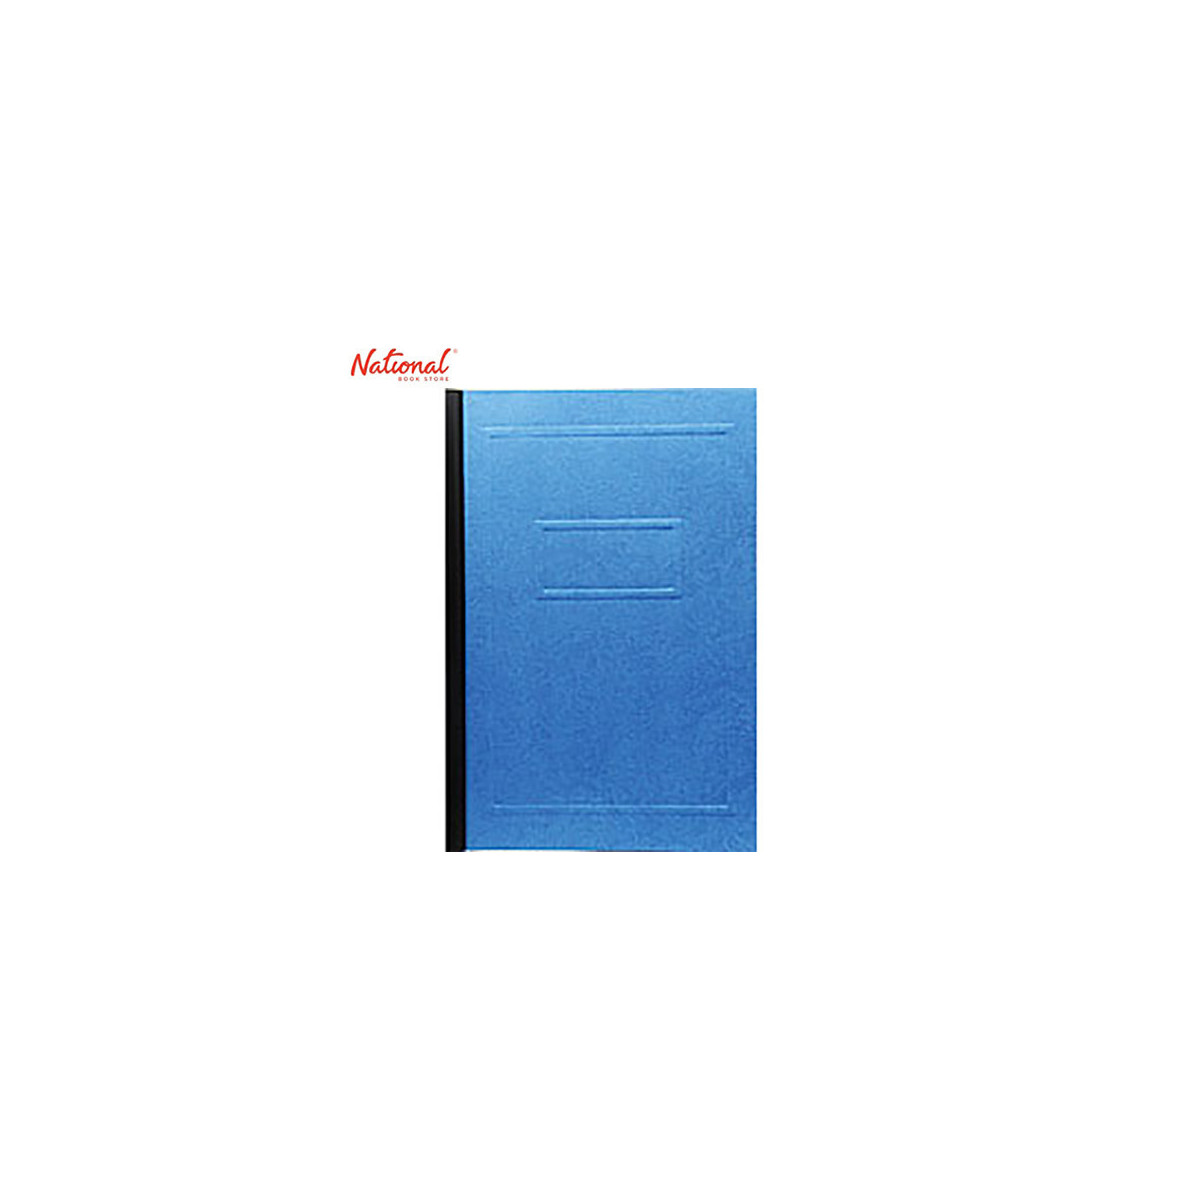 STARFILE FOLDER COLORED WITH SLIDE LONG EMBOSSED ASSTD COLOR